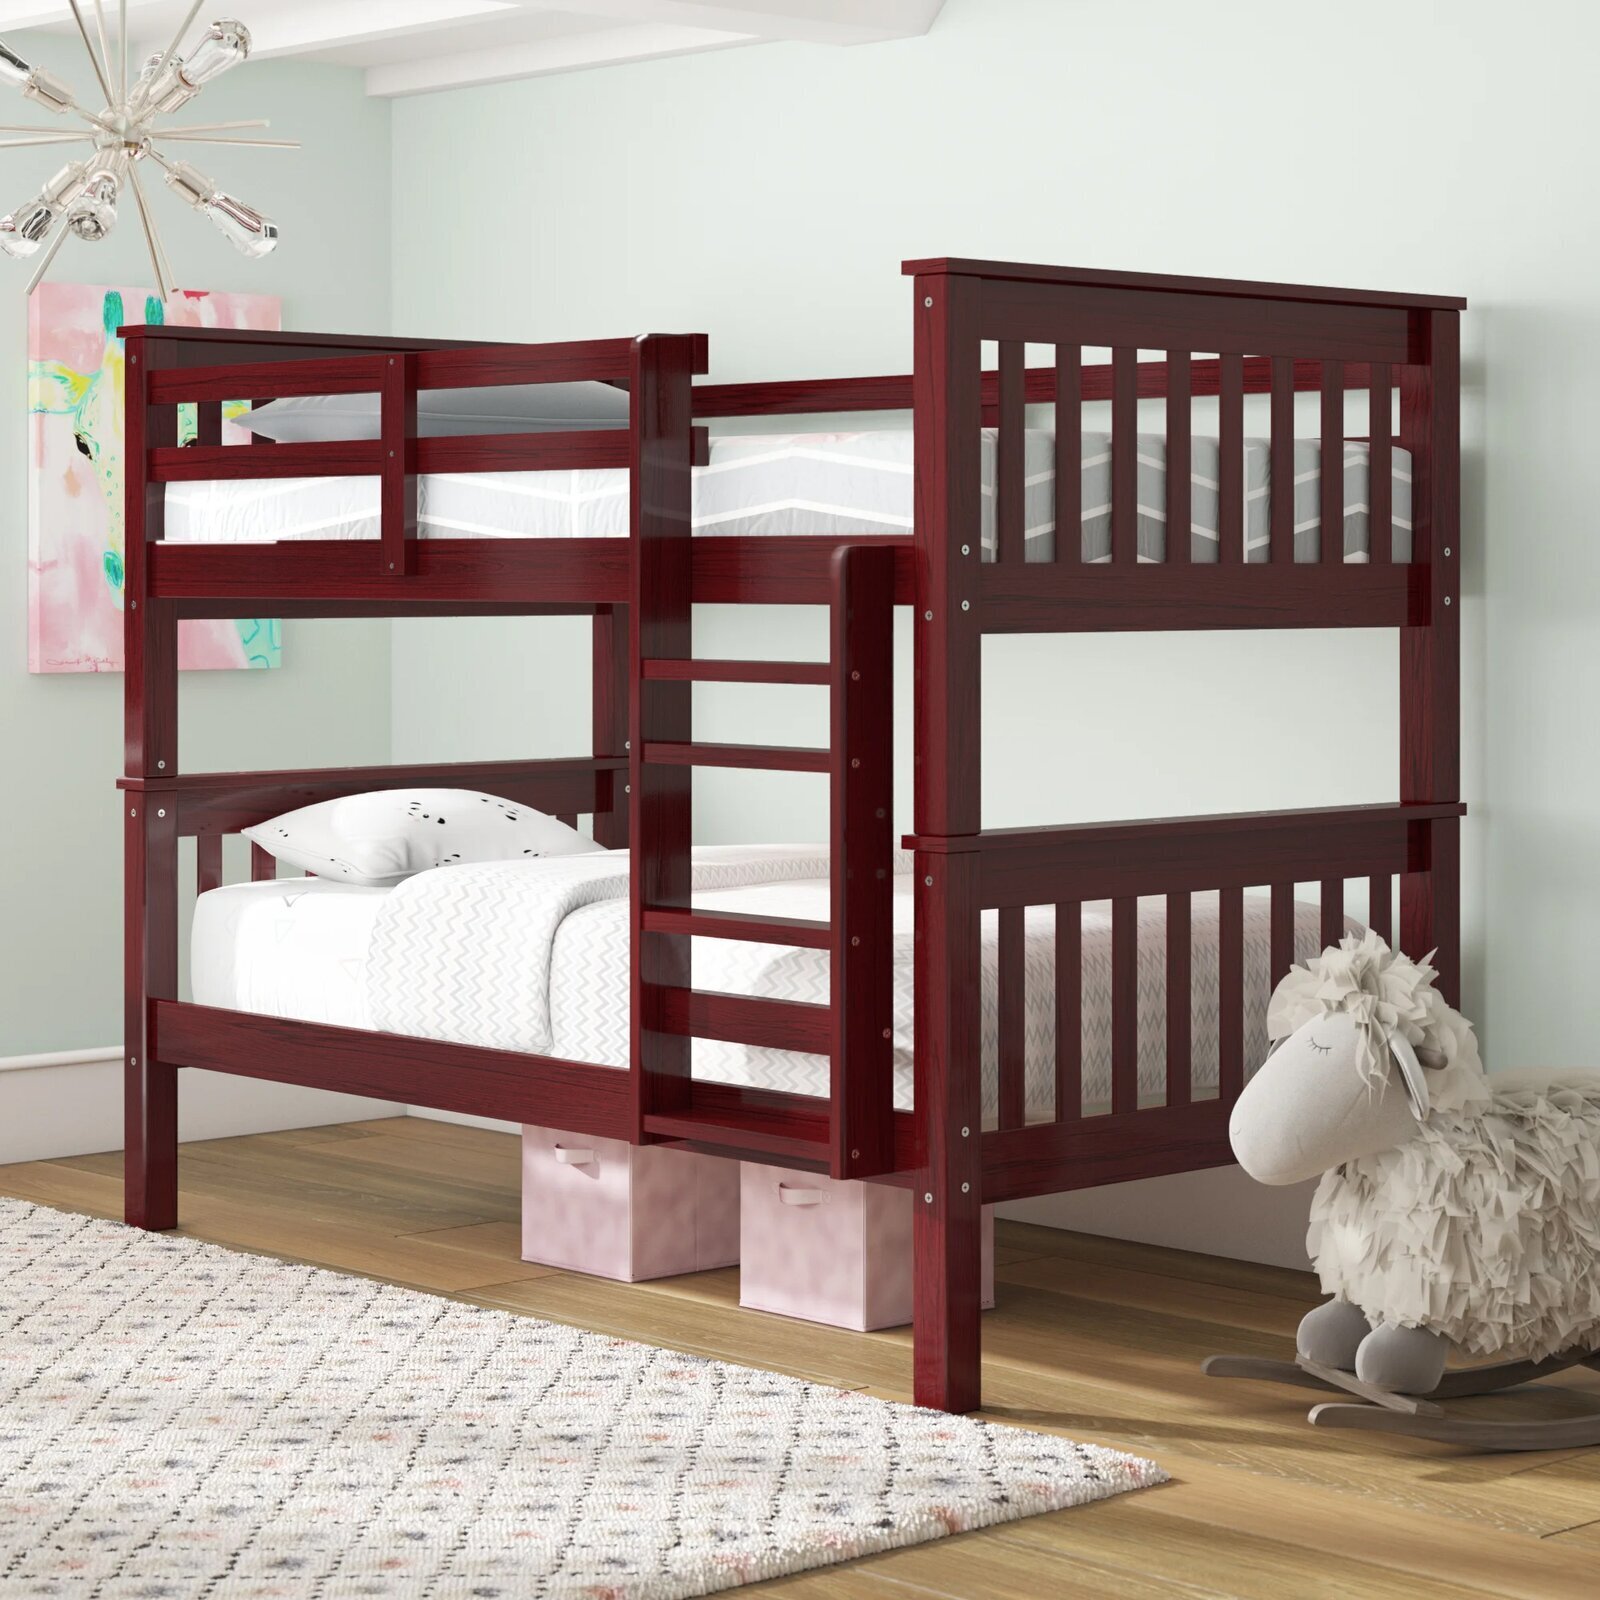 Thick Rustic Wood Bunk Bed